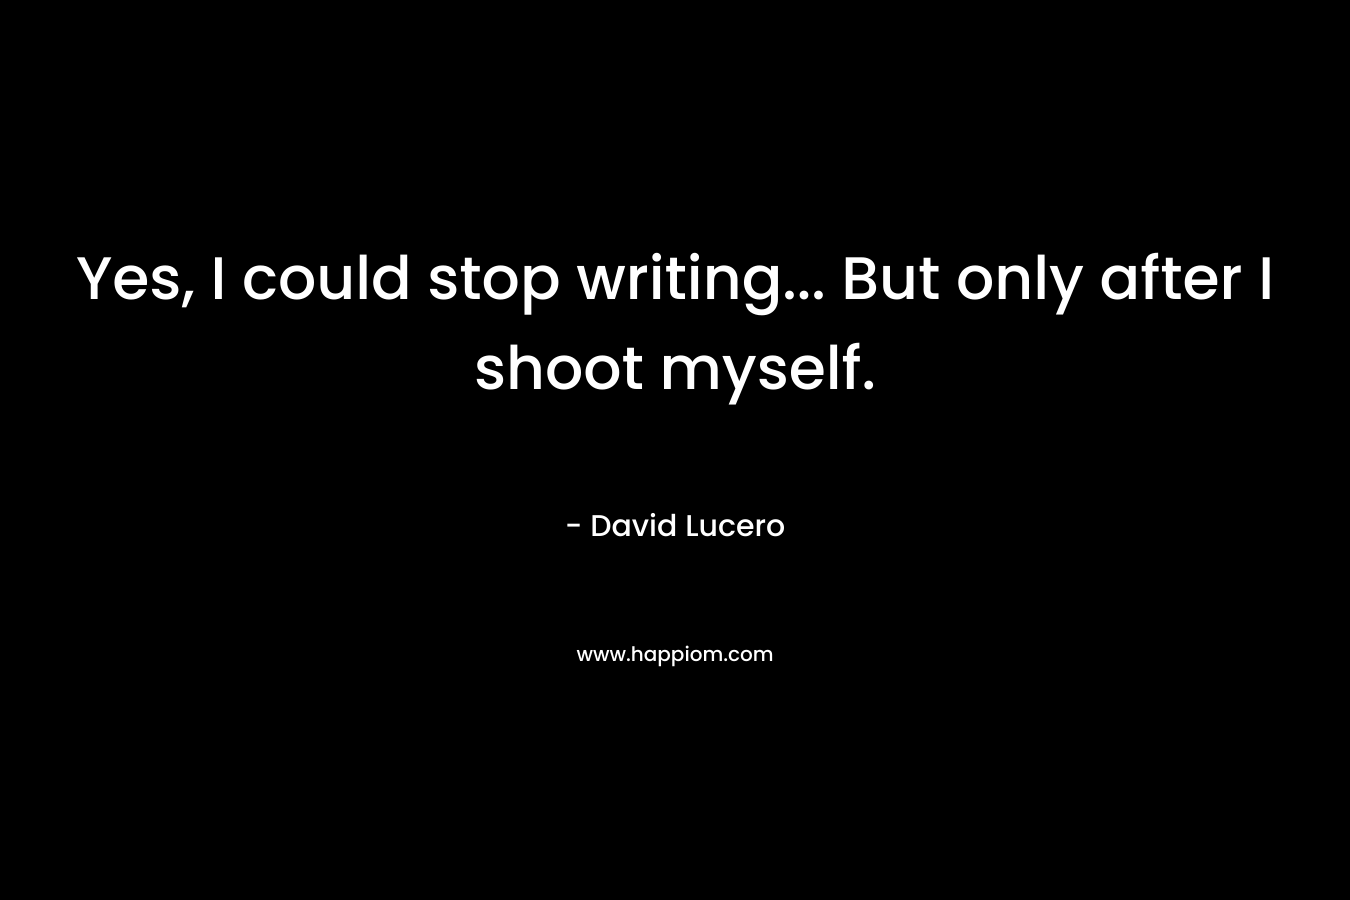 Yes, I could stop writing… But only after I shoot myself. – David Lucero